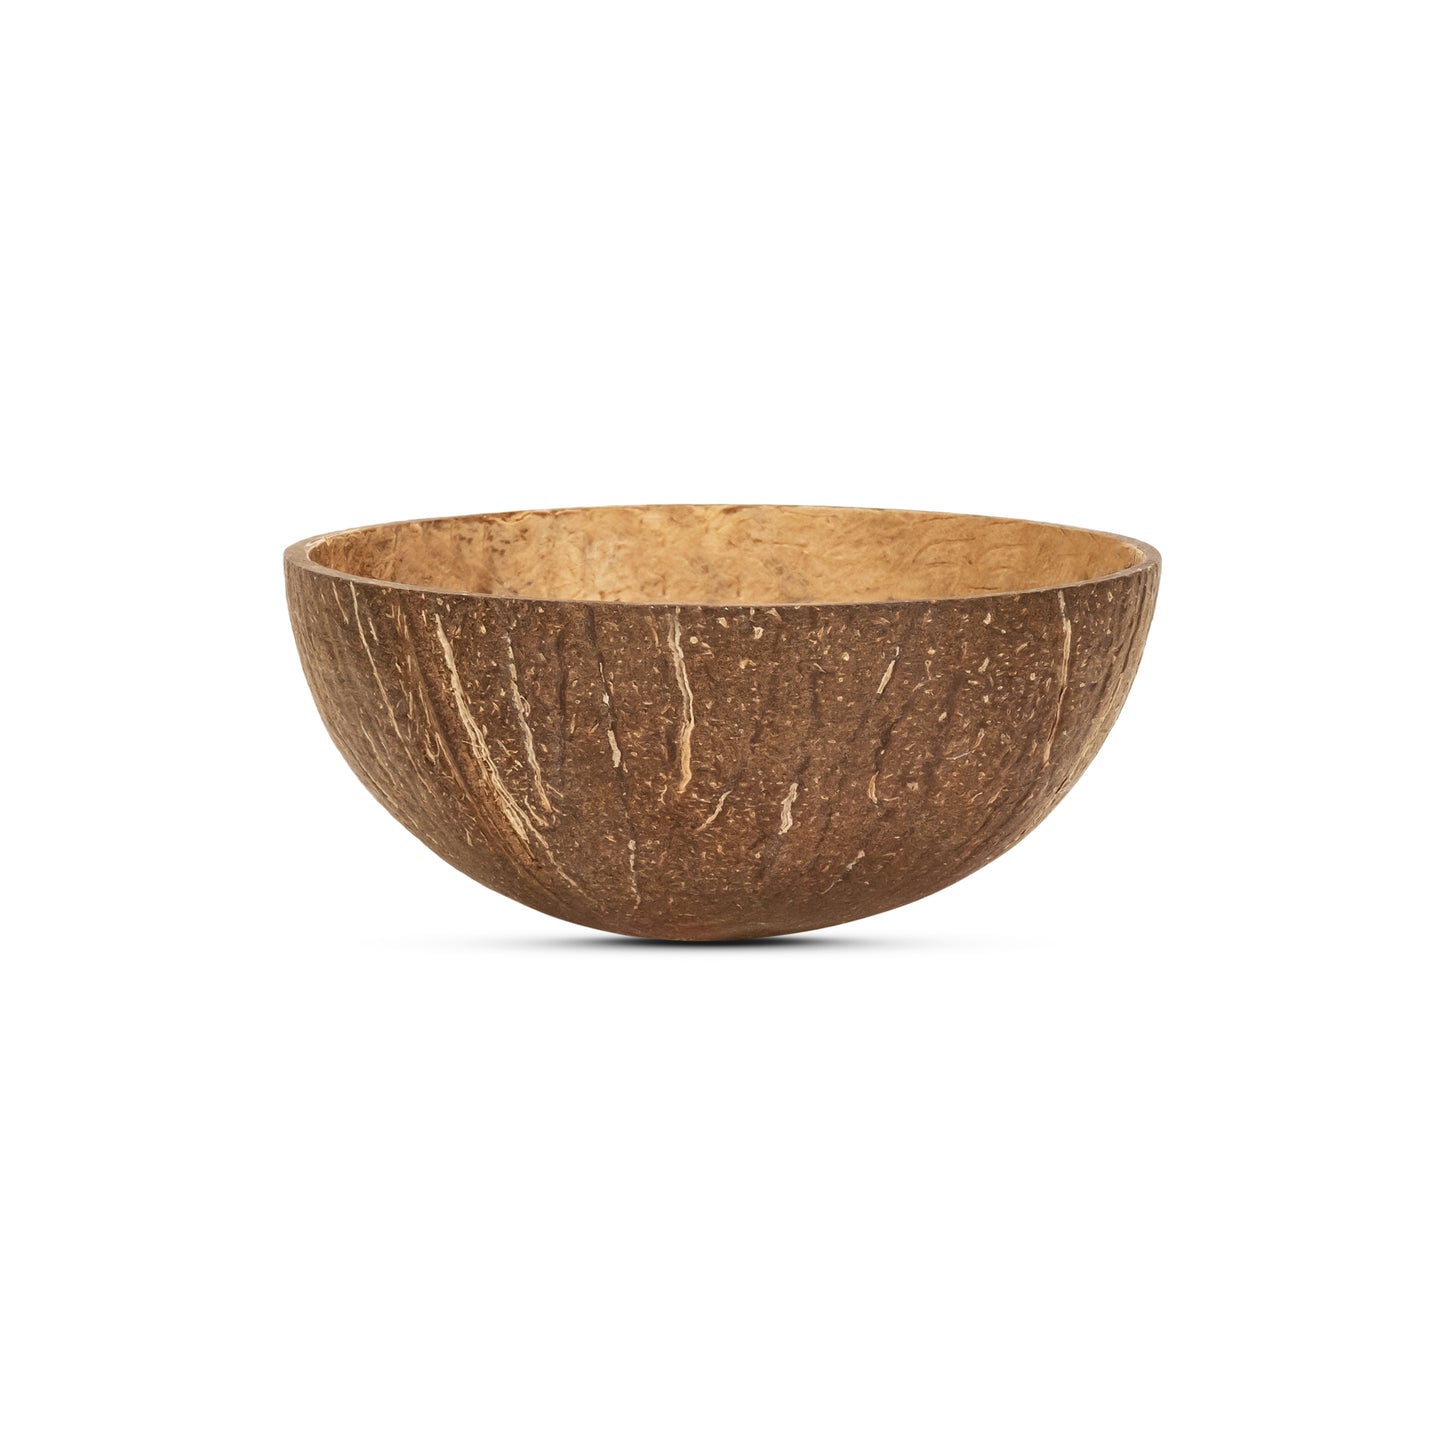 coconut shell cup for desserts